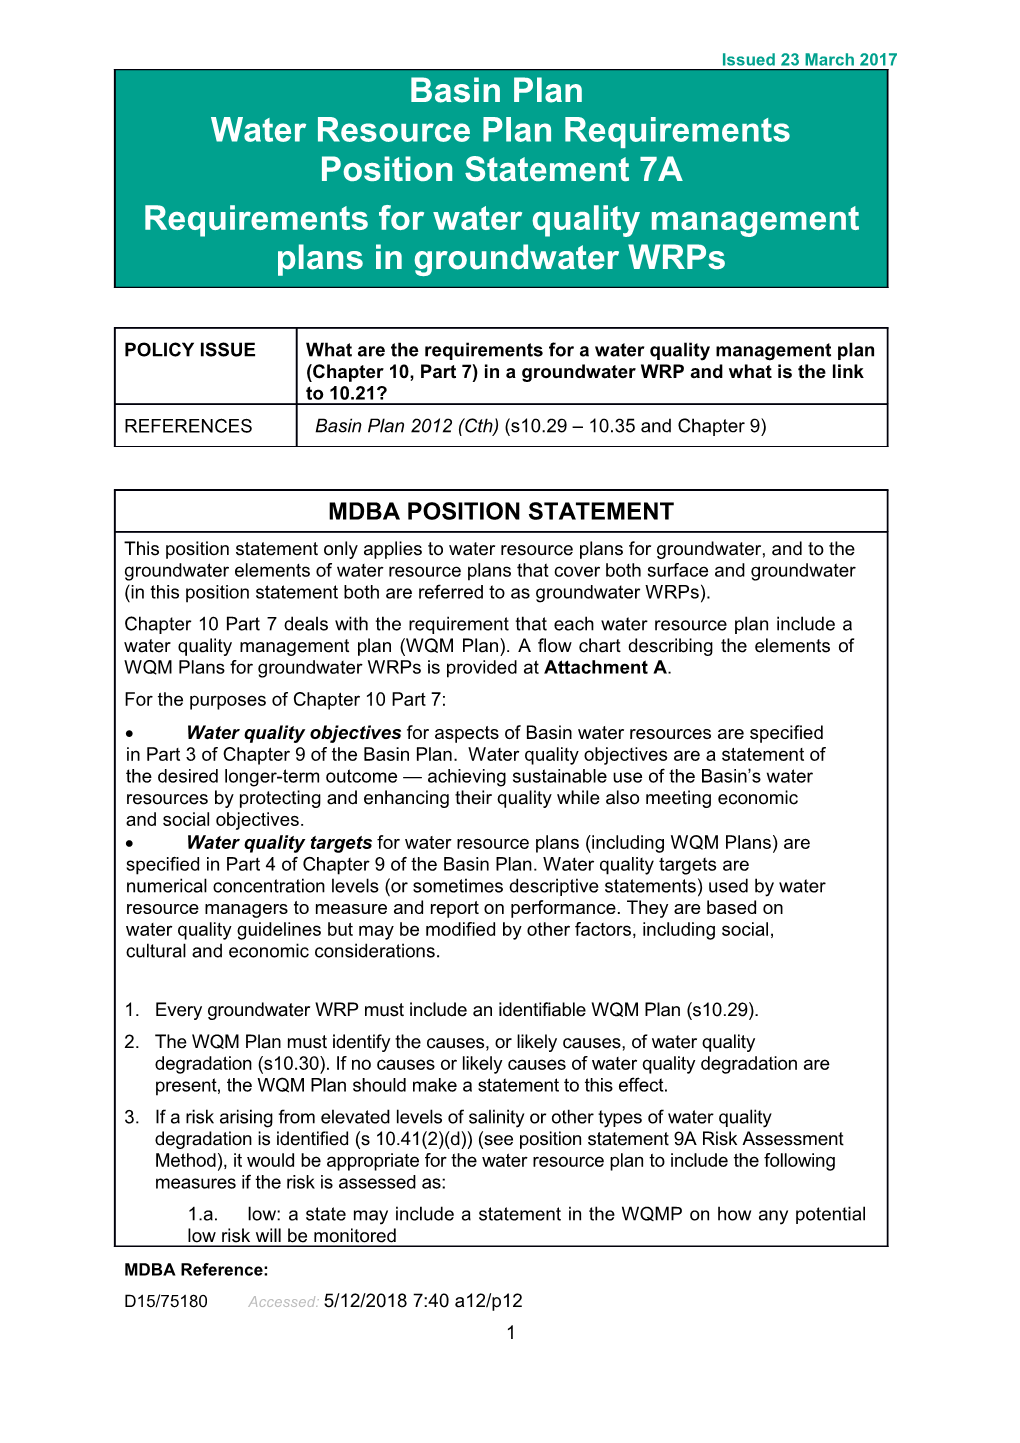 WRP Position Statement - 7A - Requirements for Water Quality Management